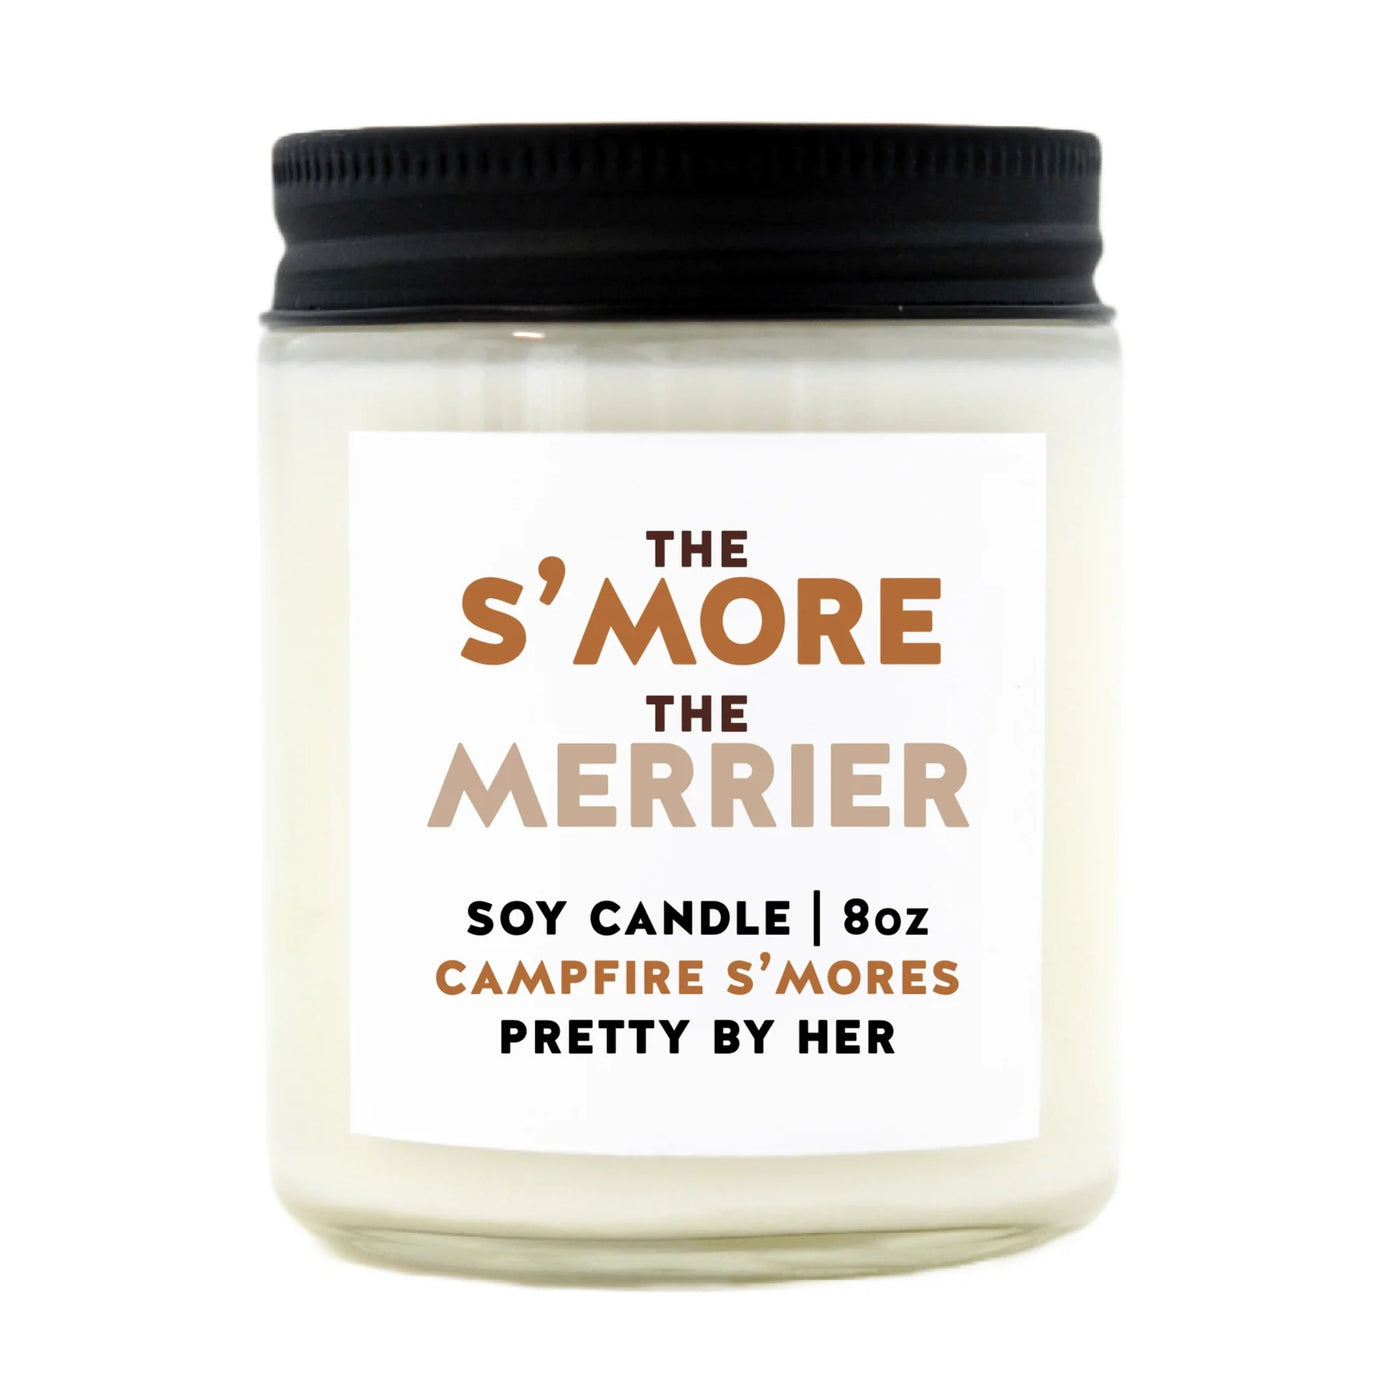 THE S'MORE THE MERRIER CANDLE